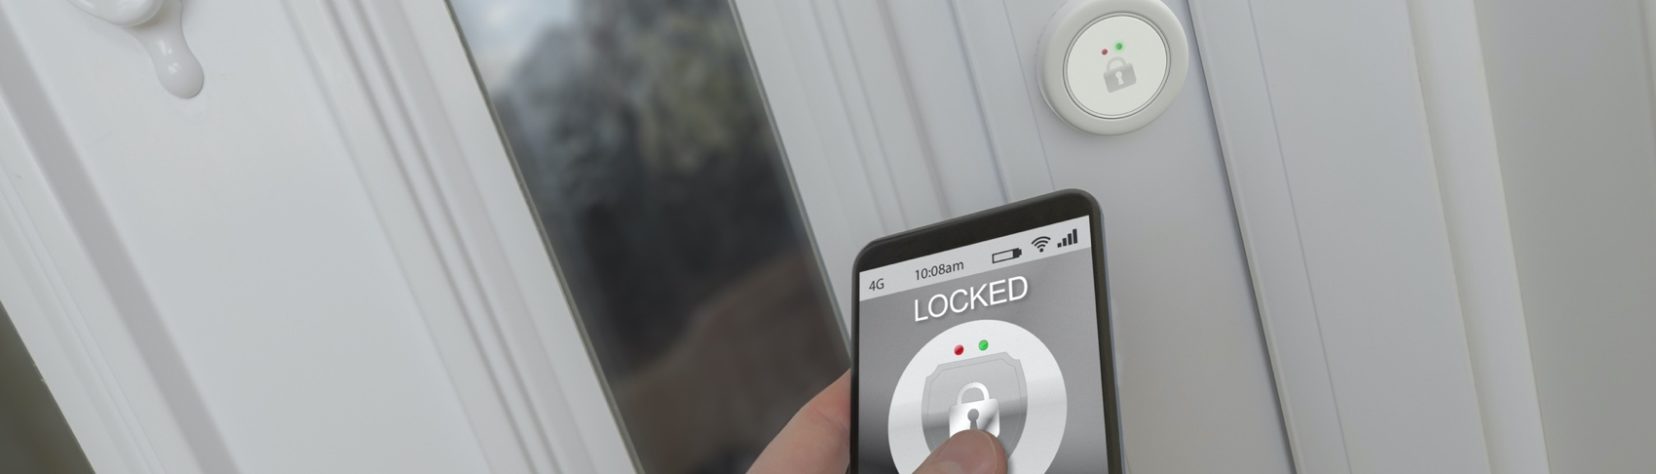 mobile device locking a door